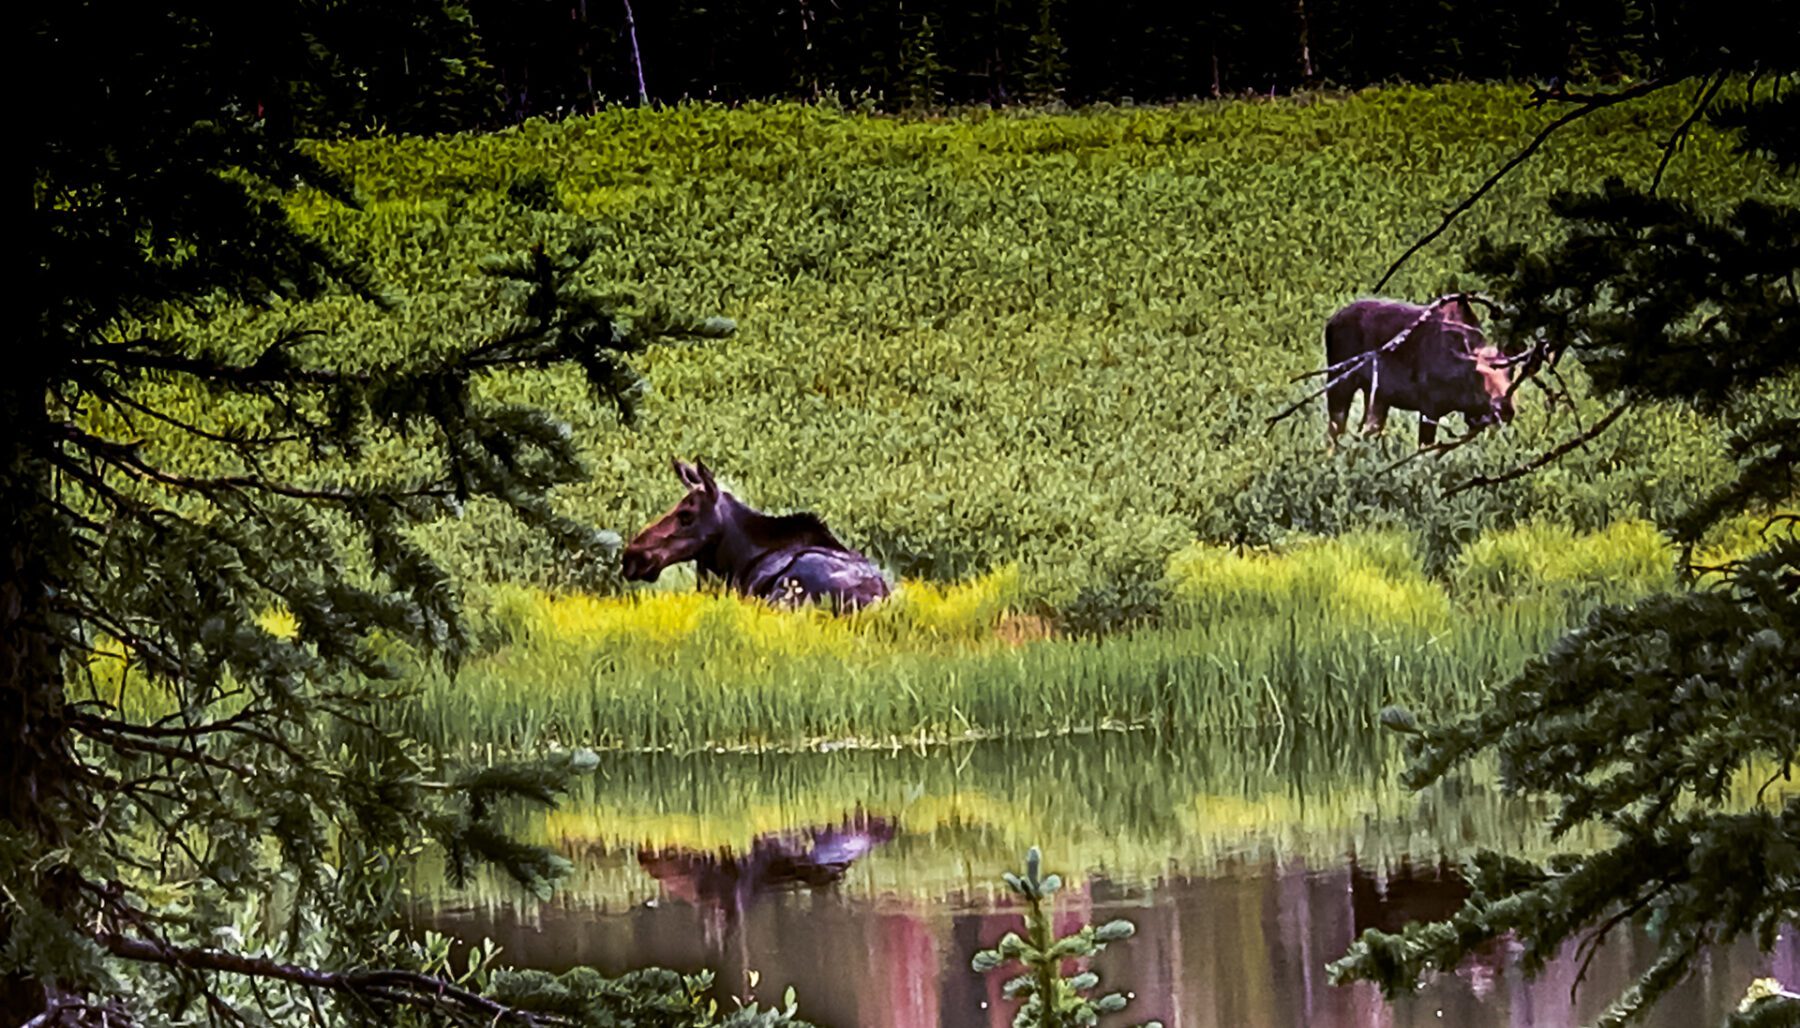 Two Montana grazing in the grass near a pond.